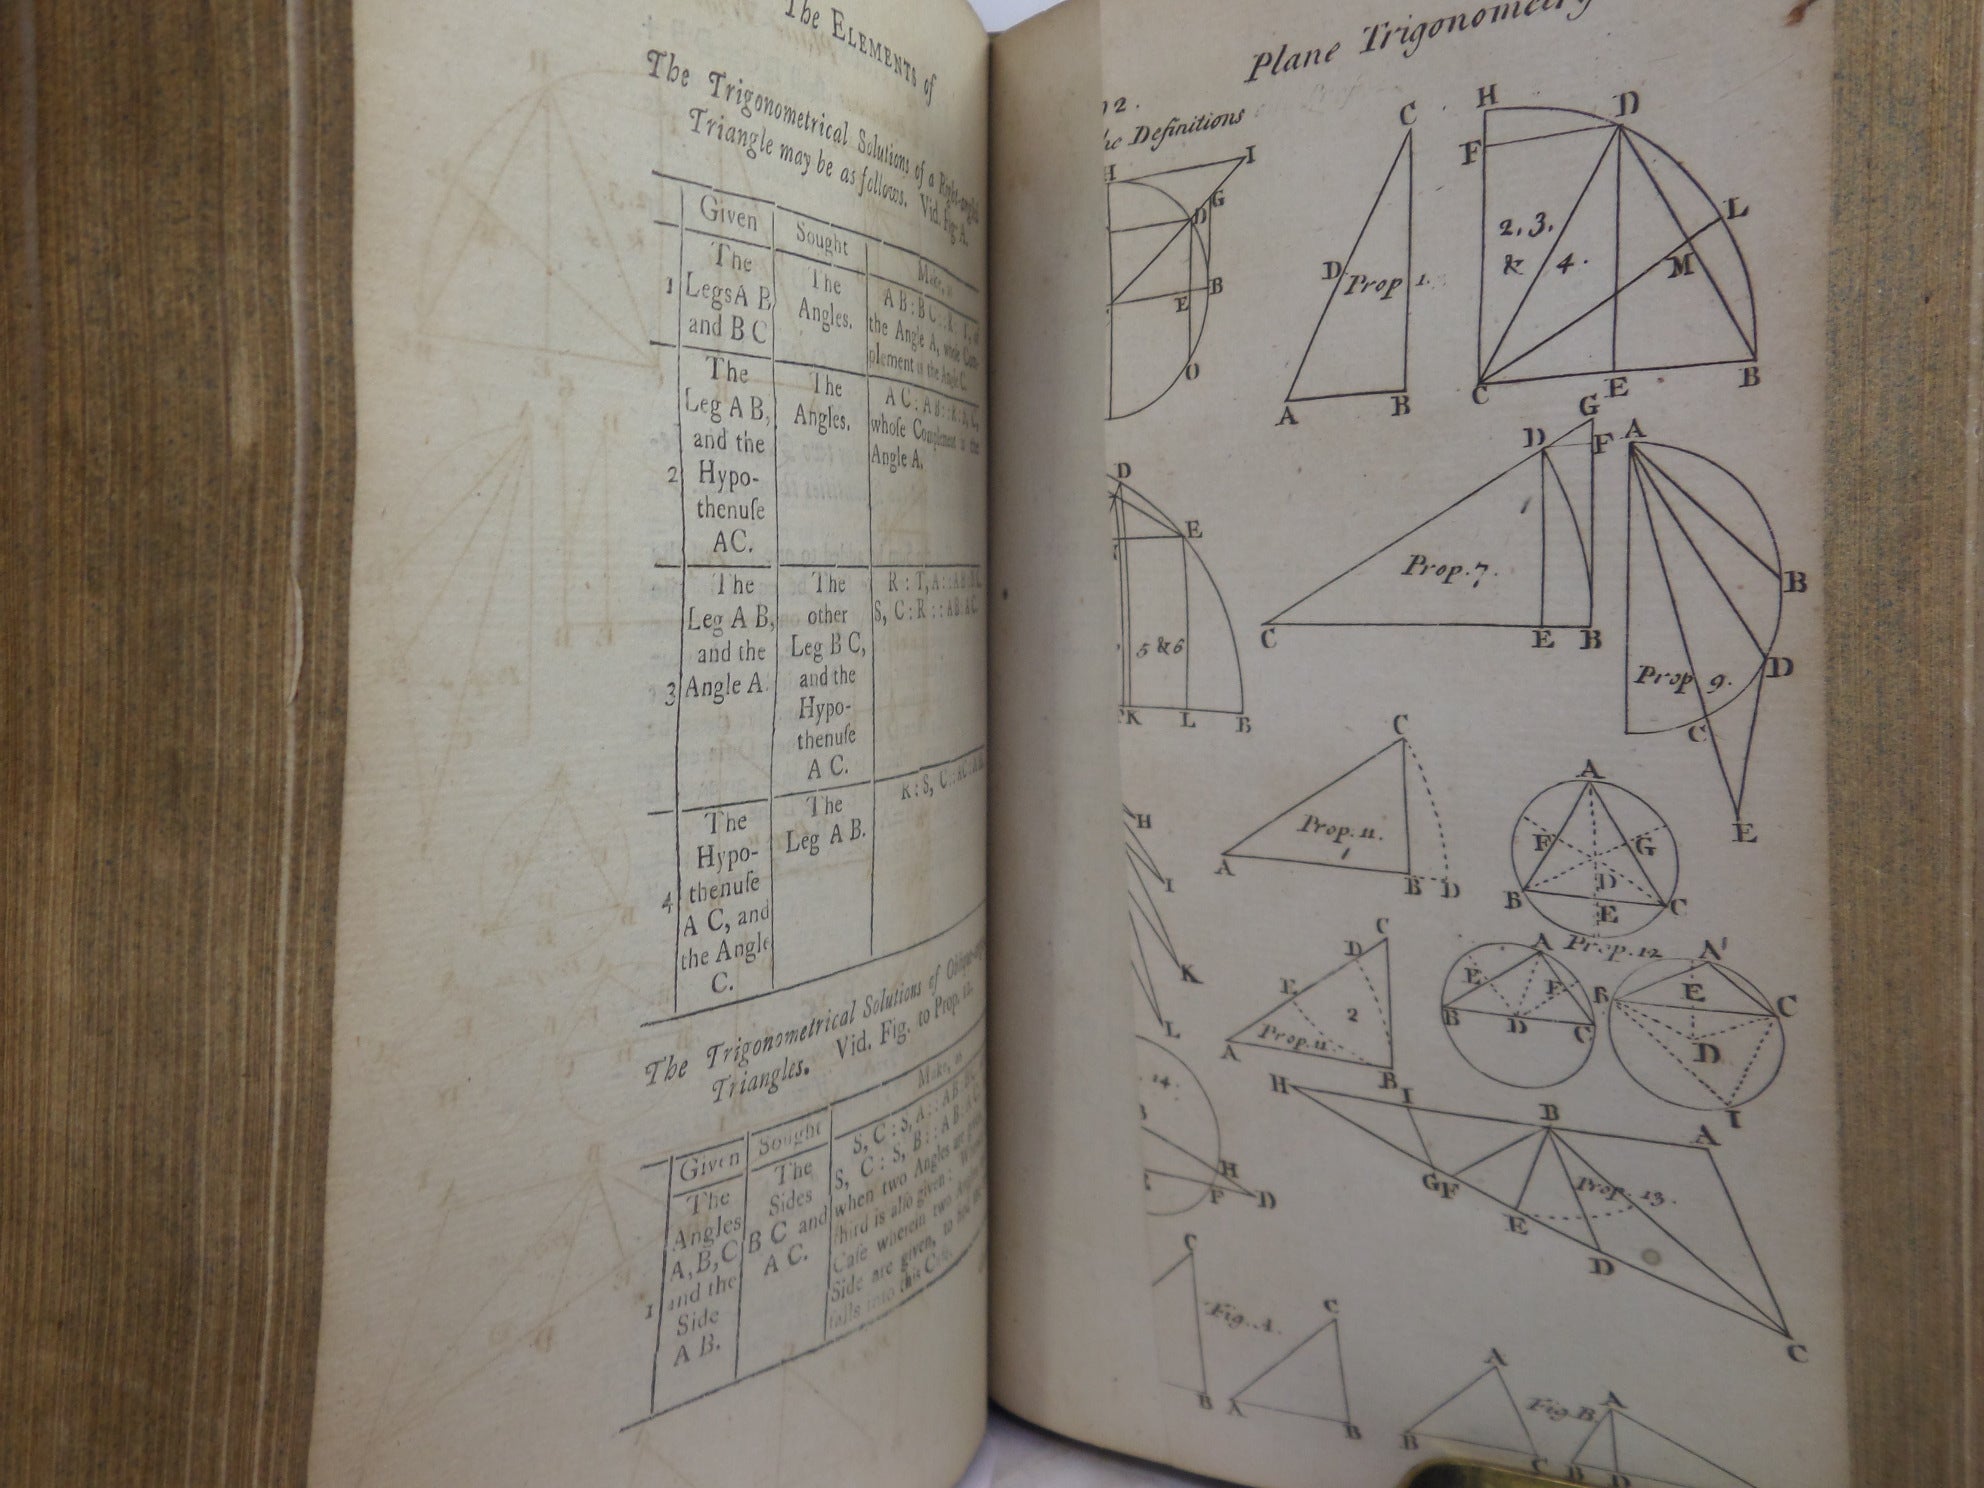 EUCLID'S ELEMENTS OF GEOMETRY BY JOHN KEILL 1782 LEATHER BINDING